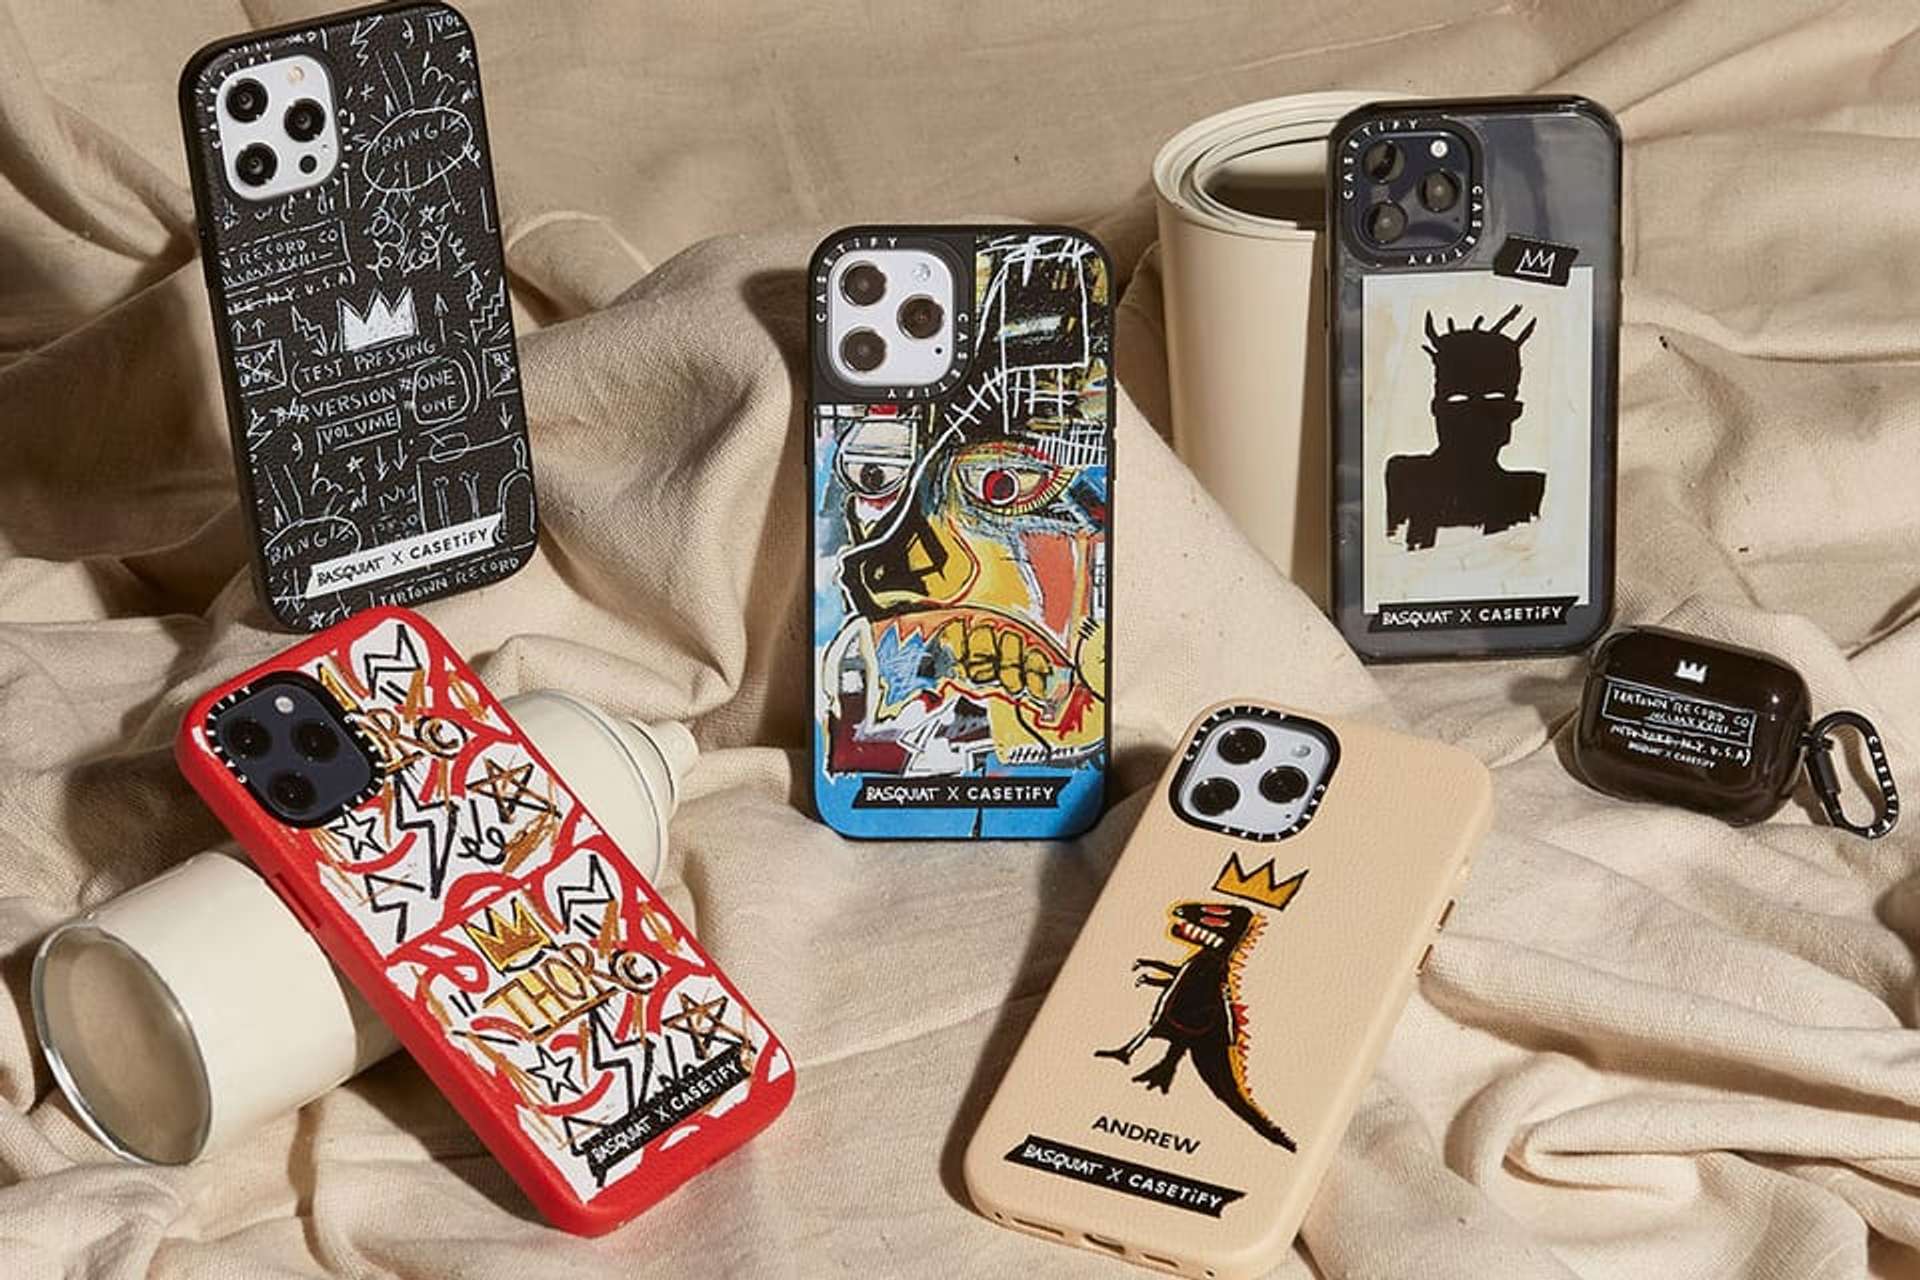 An image of several phone and earphone cases offered by Casetify in collaboration with Basquiat's estate.